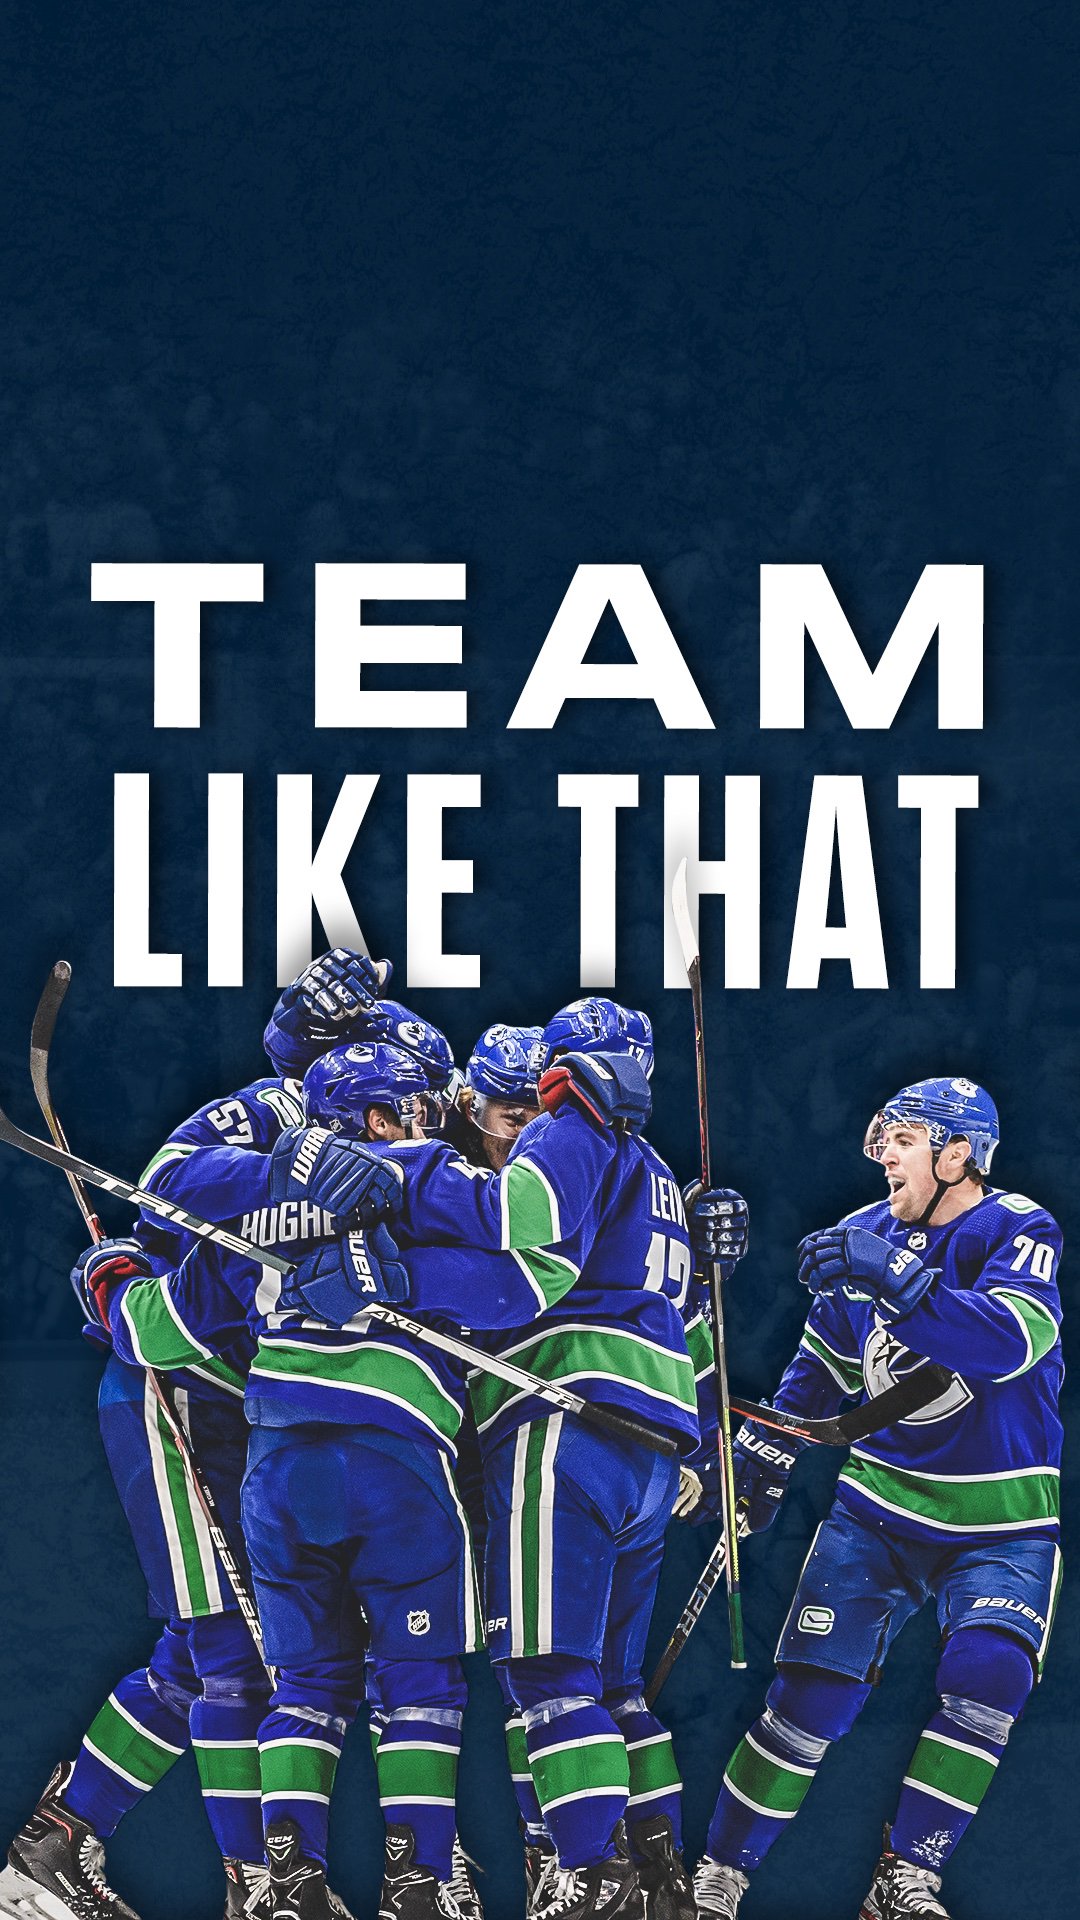 Vancouver canucks on this wallpaper couldnt wait until next wednesday teamlikethat httpstcotgktffvxk